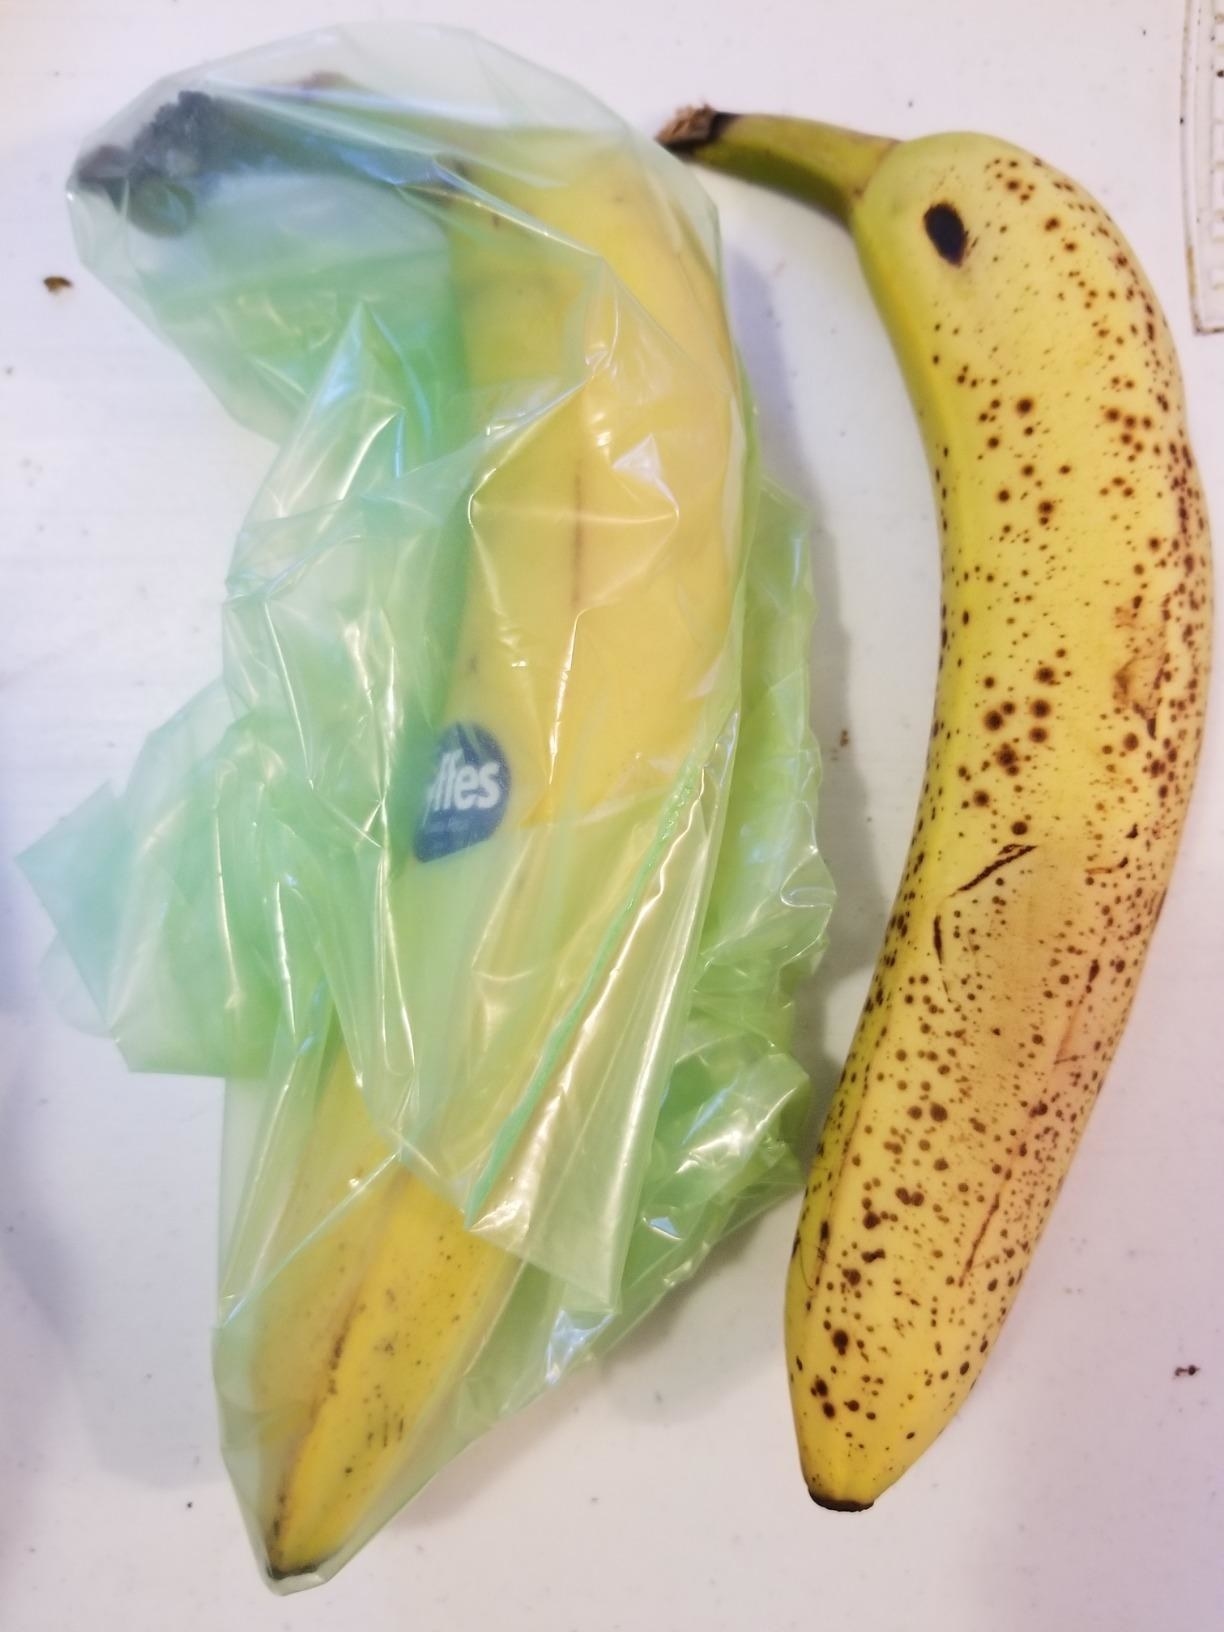 Review photo showing yellow banana stored in green bag next to control banana not stored in green bag, which is much riper with more brown spots